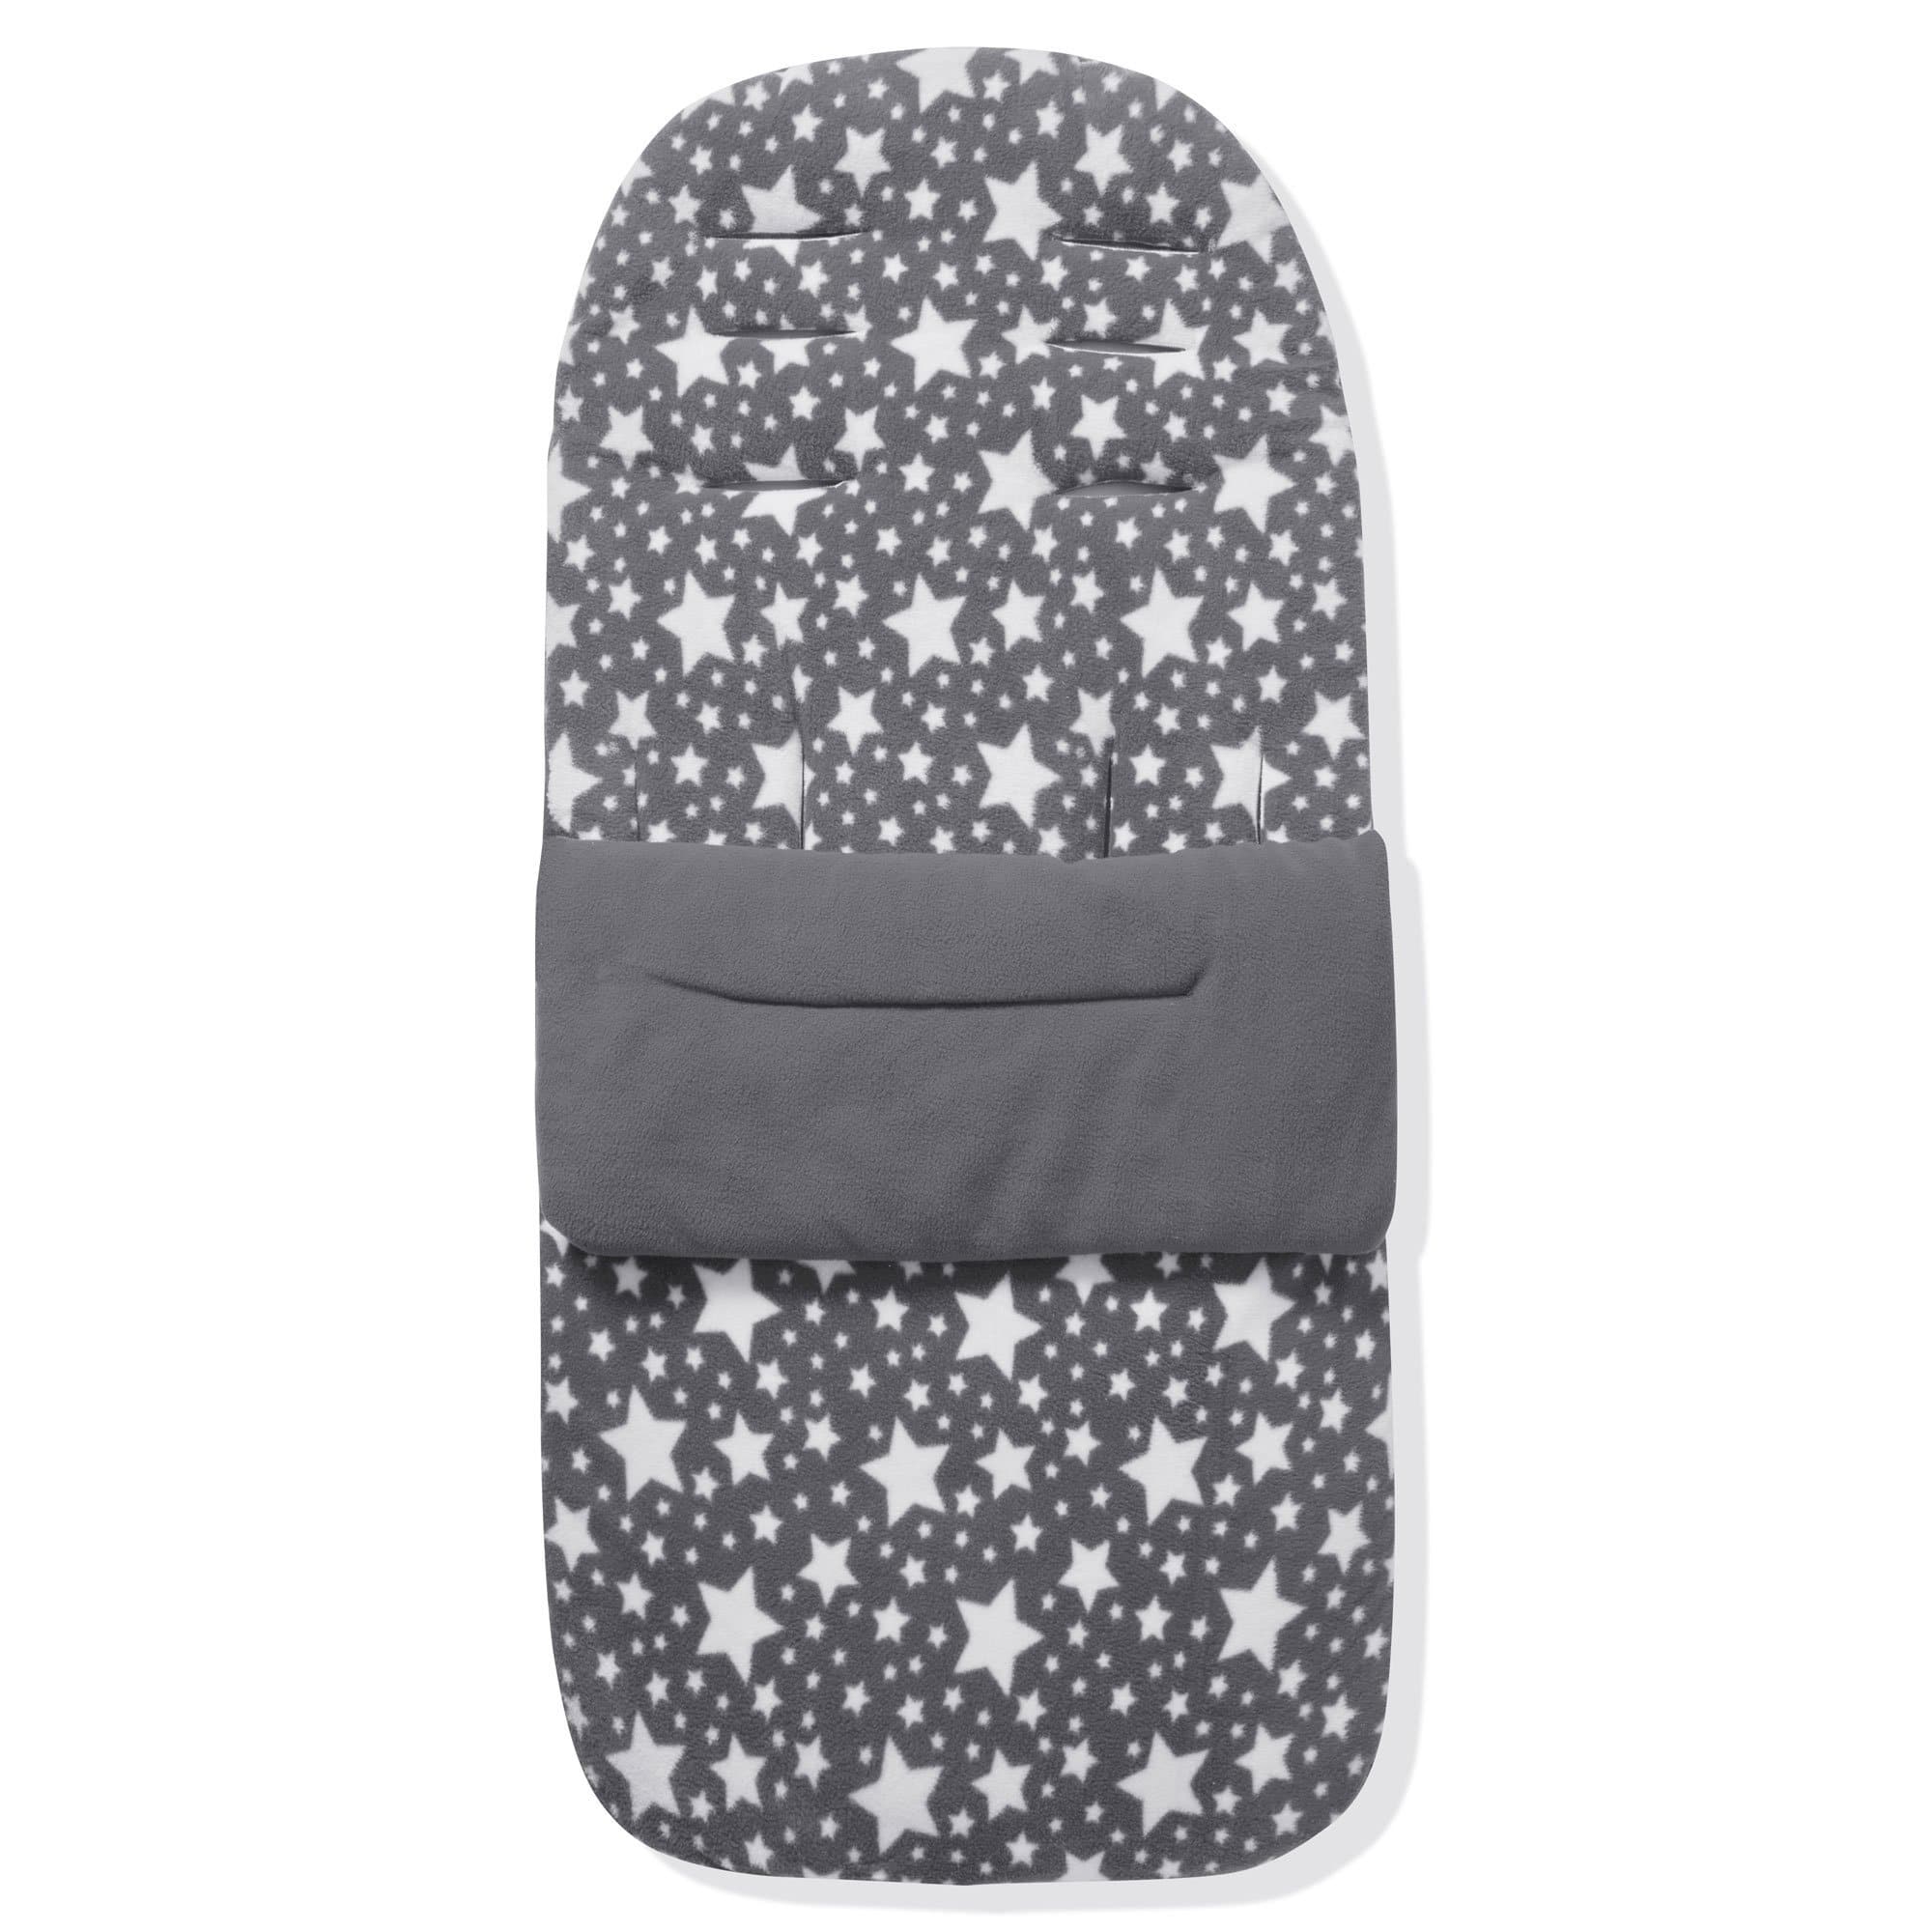 Fleece Footmuff / Cosy Toes Compatible with Out 'n' About - Grey Star / Fits All Models | For Your Little One